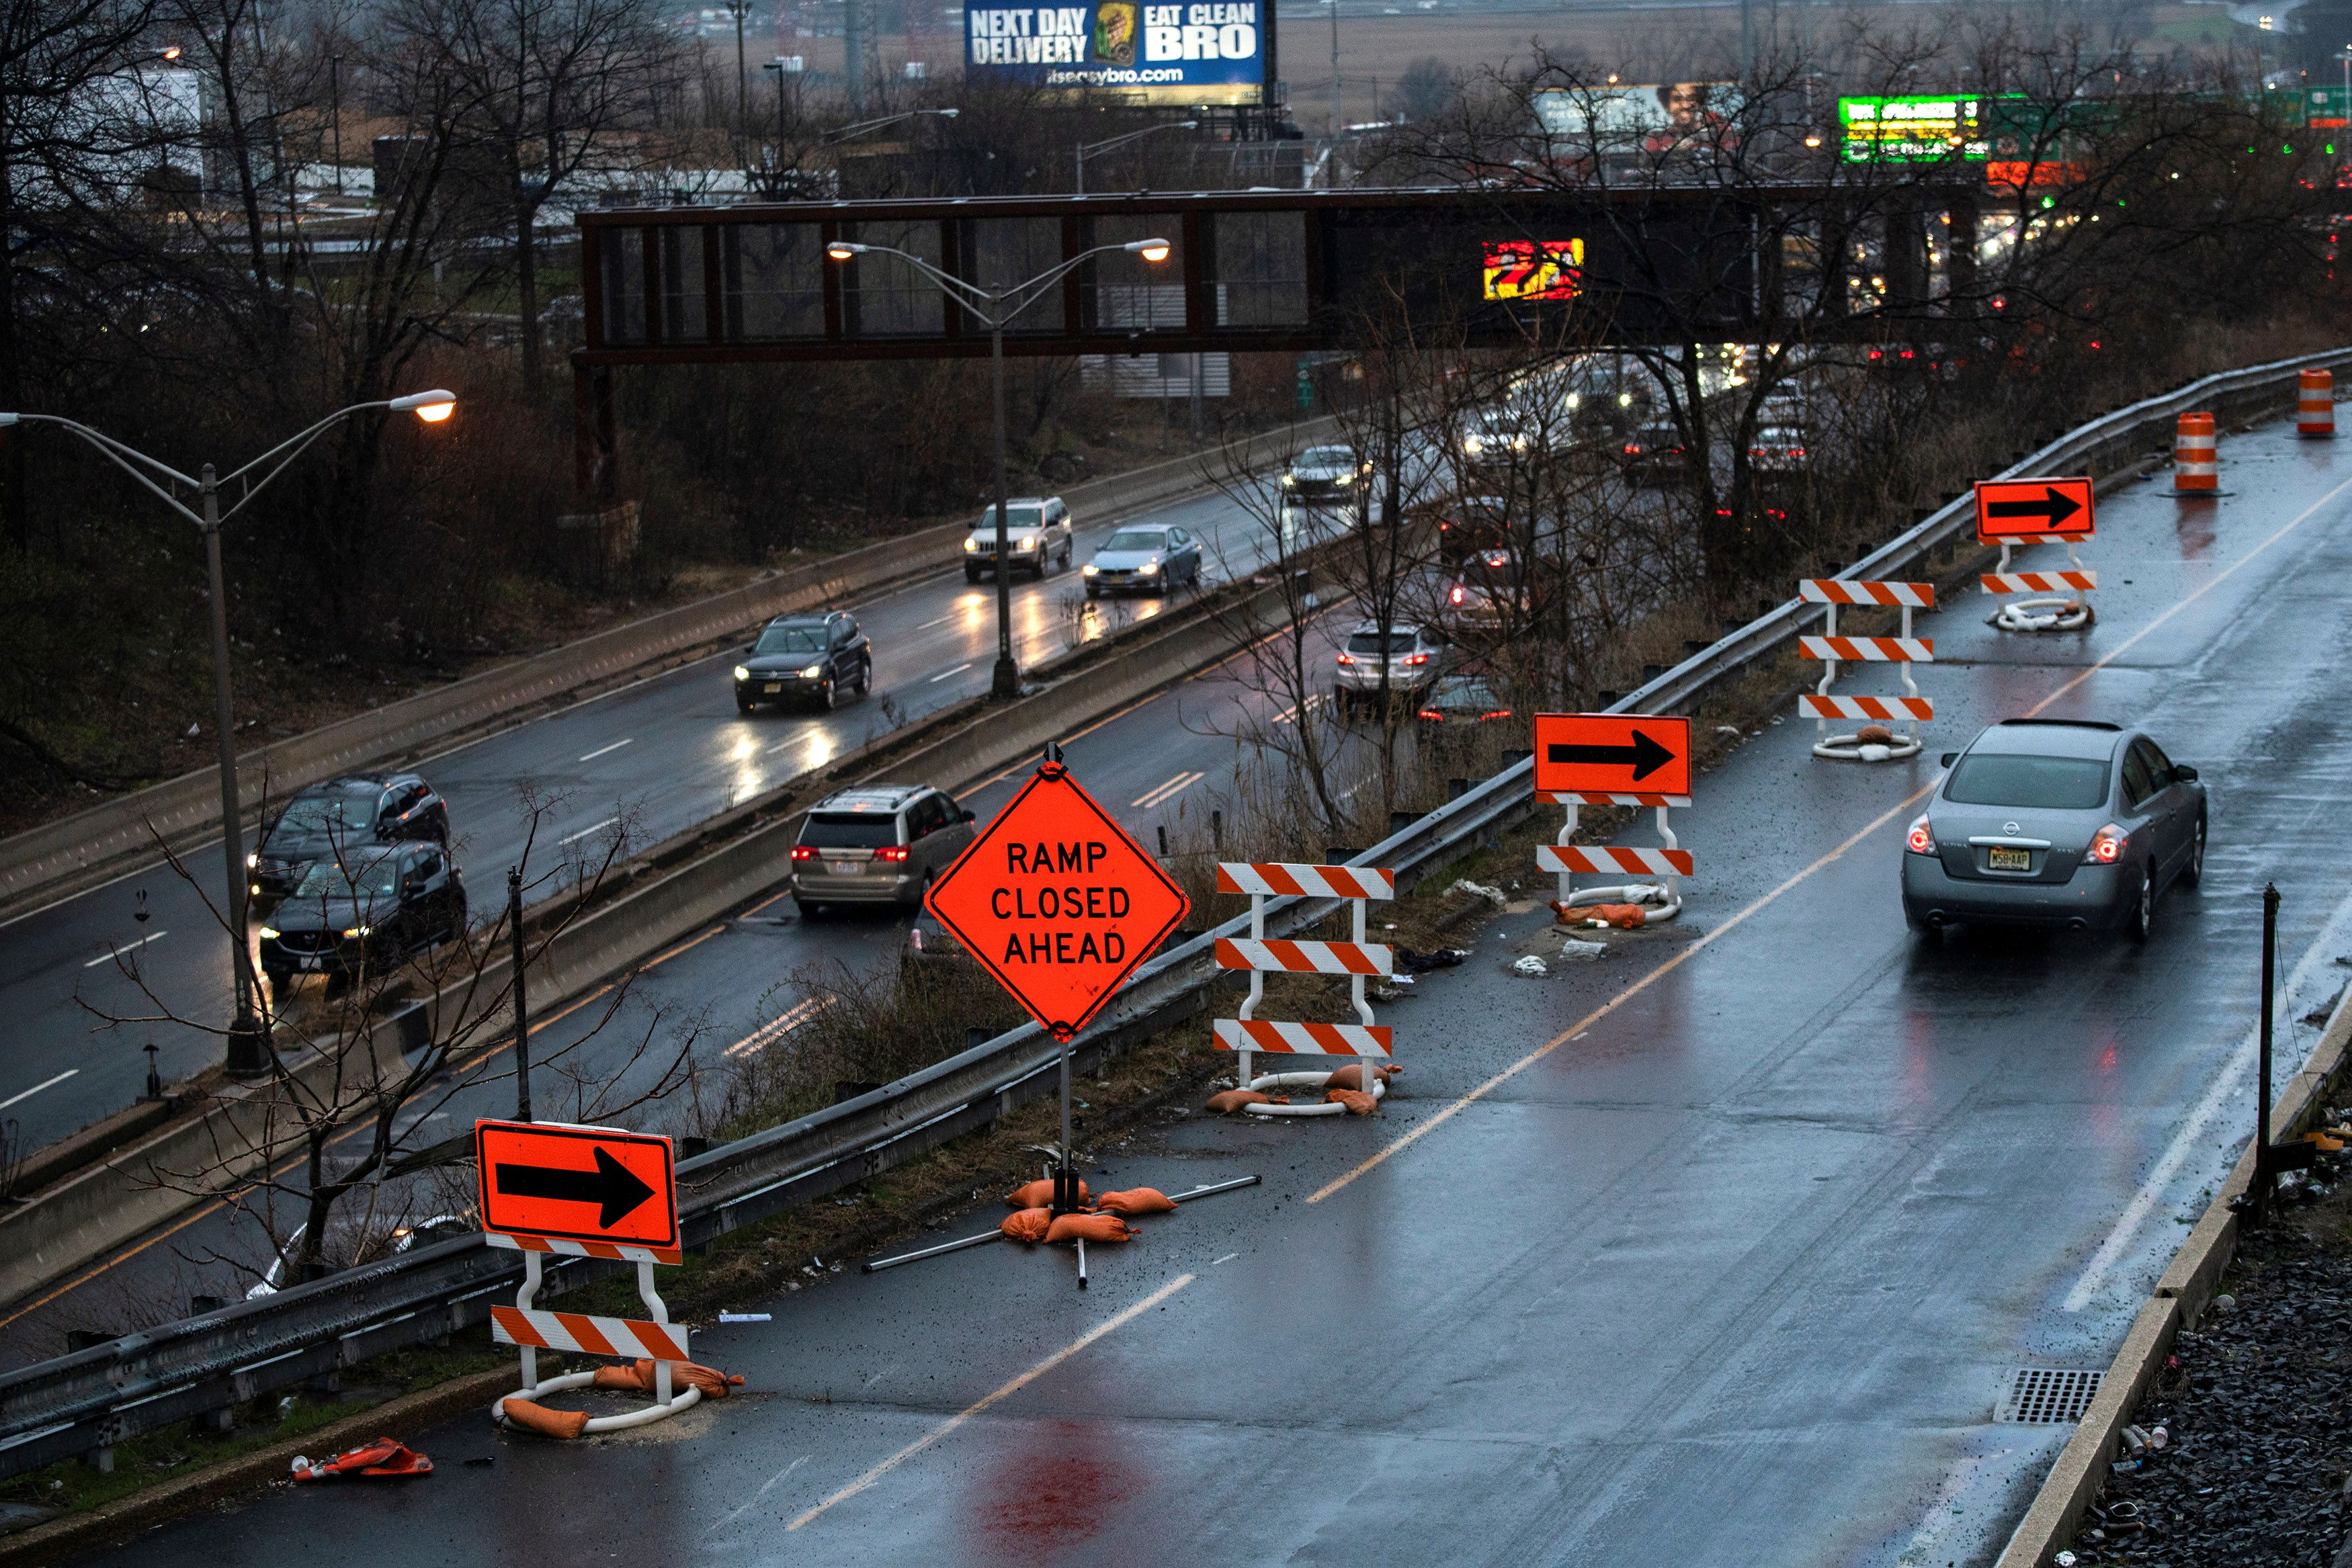 Cars drive along the NJ 495 route while road work signs are seen on the roadside, in Union City